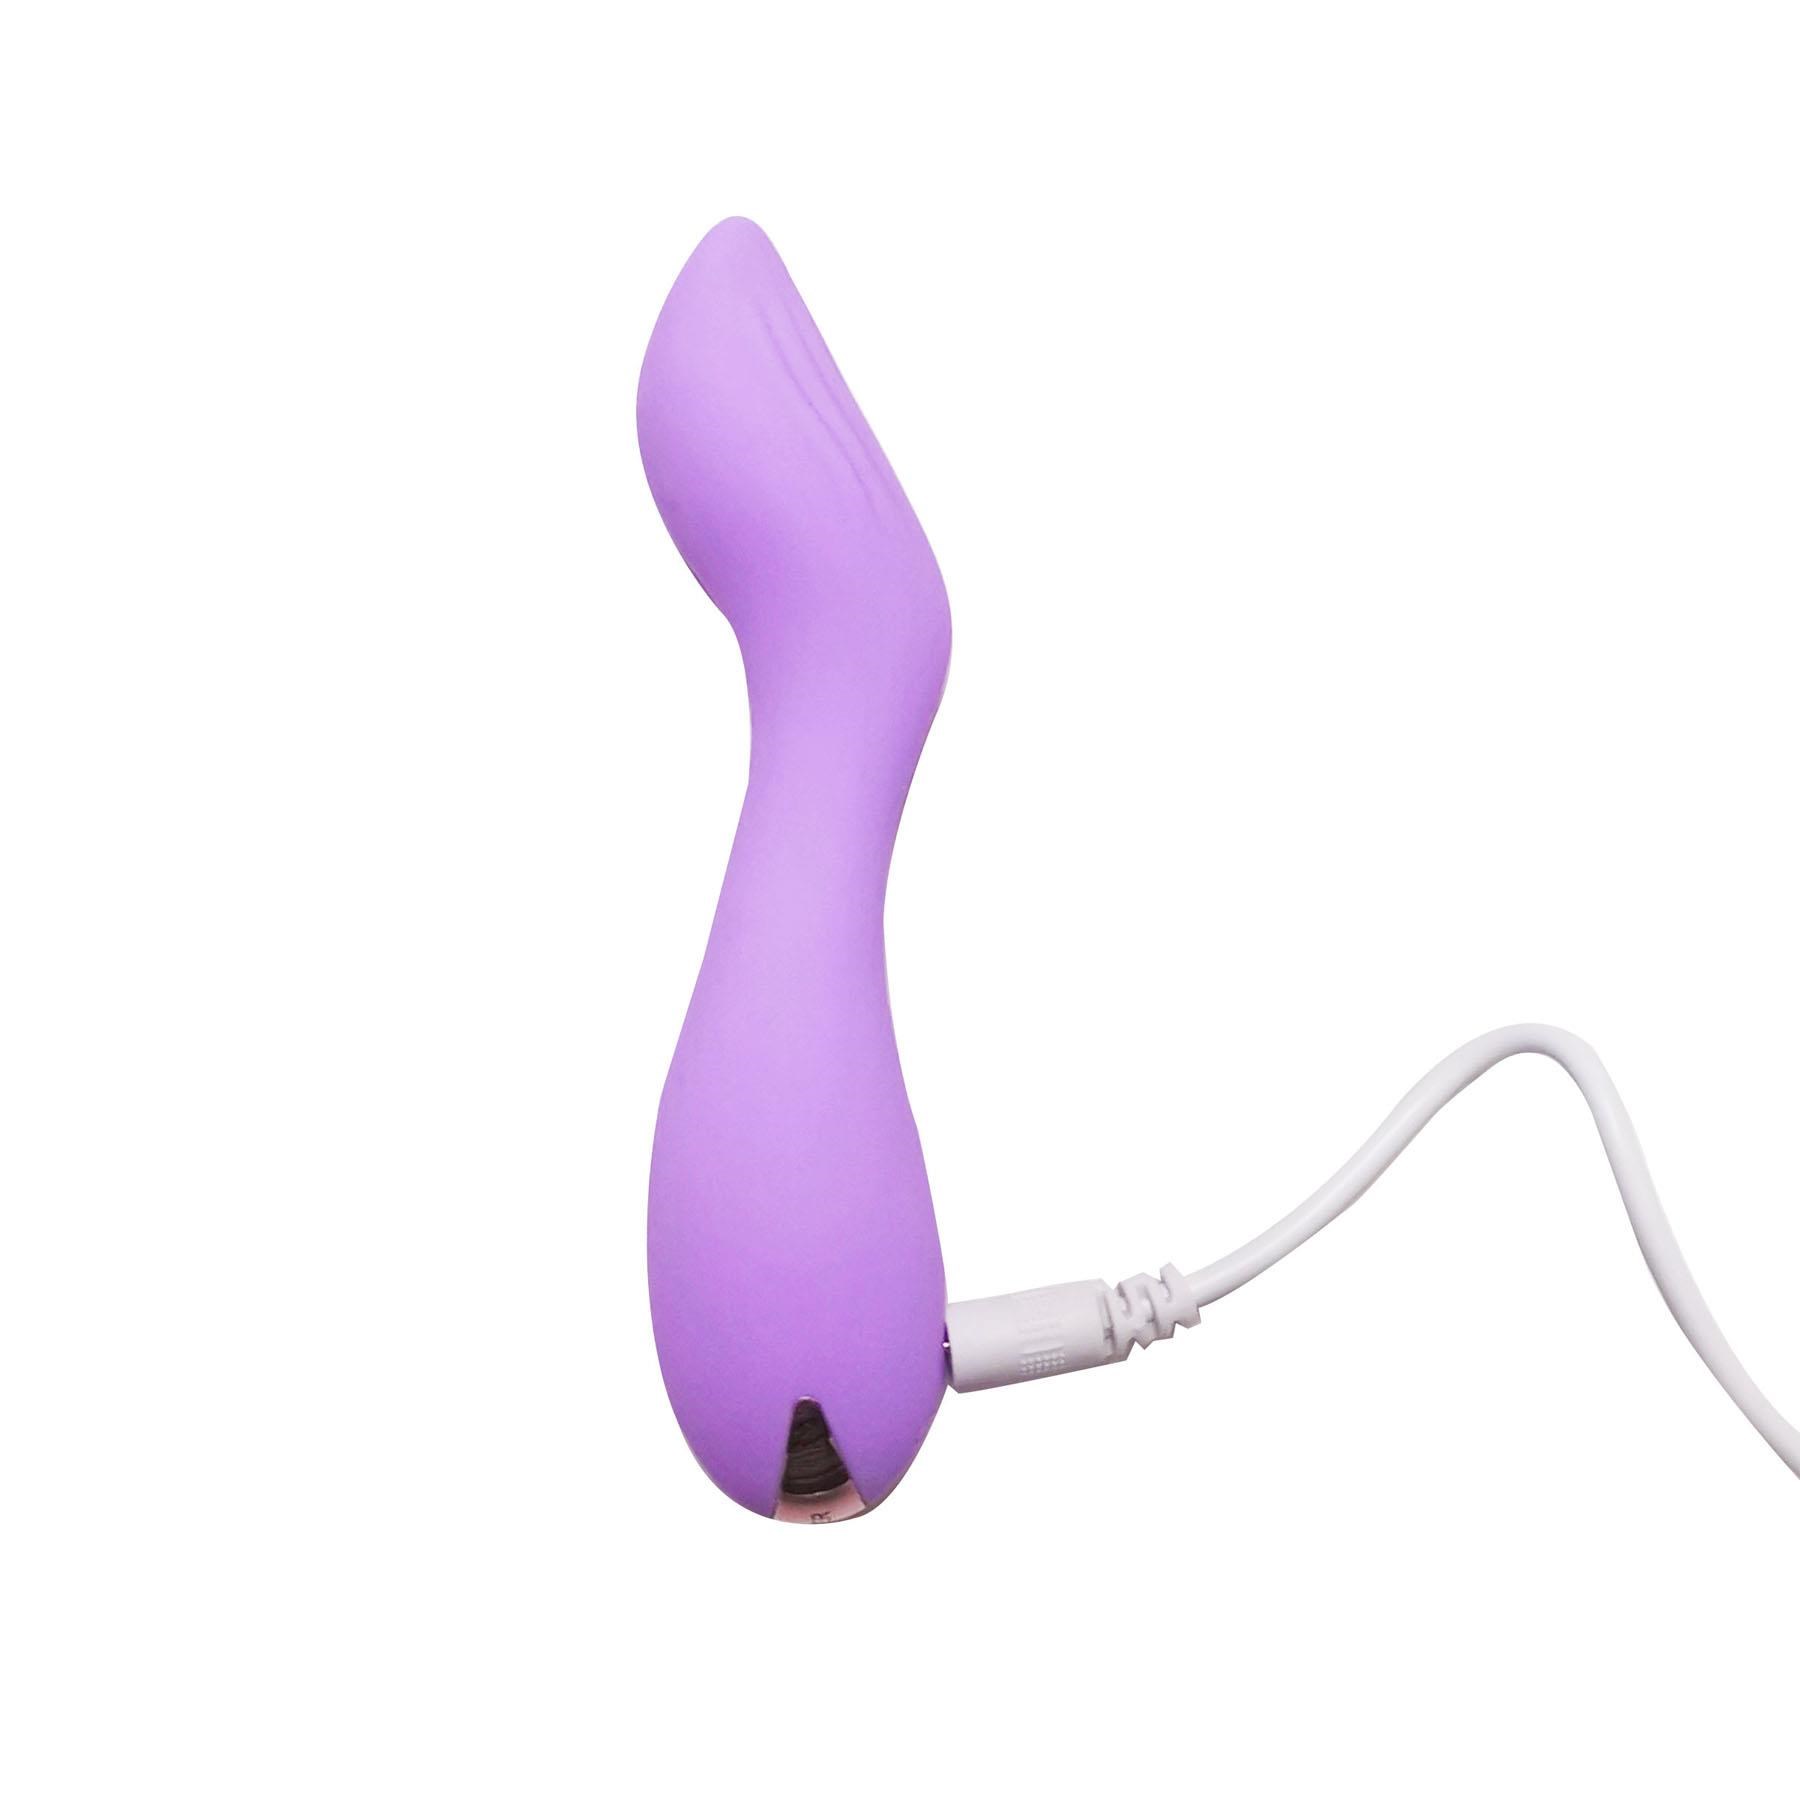 Petite Pleaser Mini G-Spot Vibrator - Showing Where Charging Cable is Placed